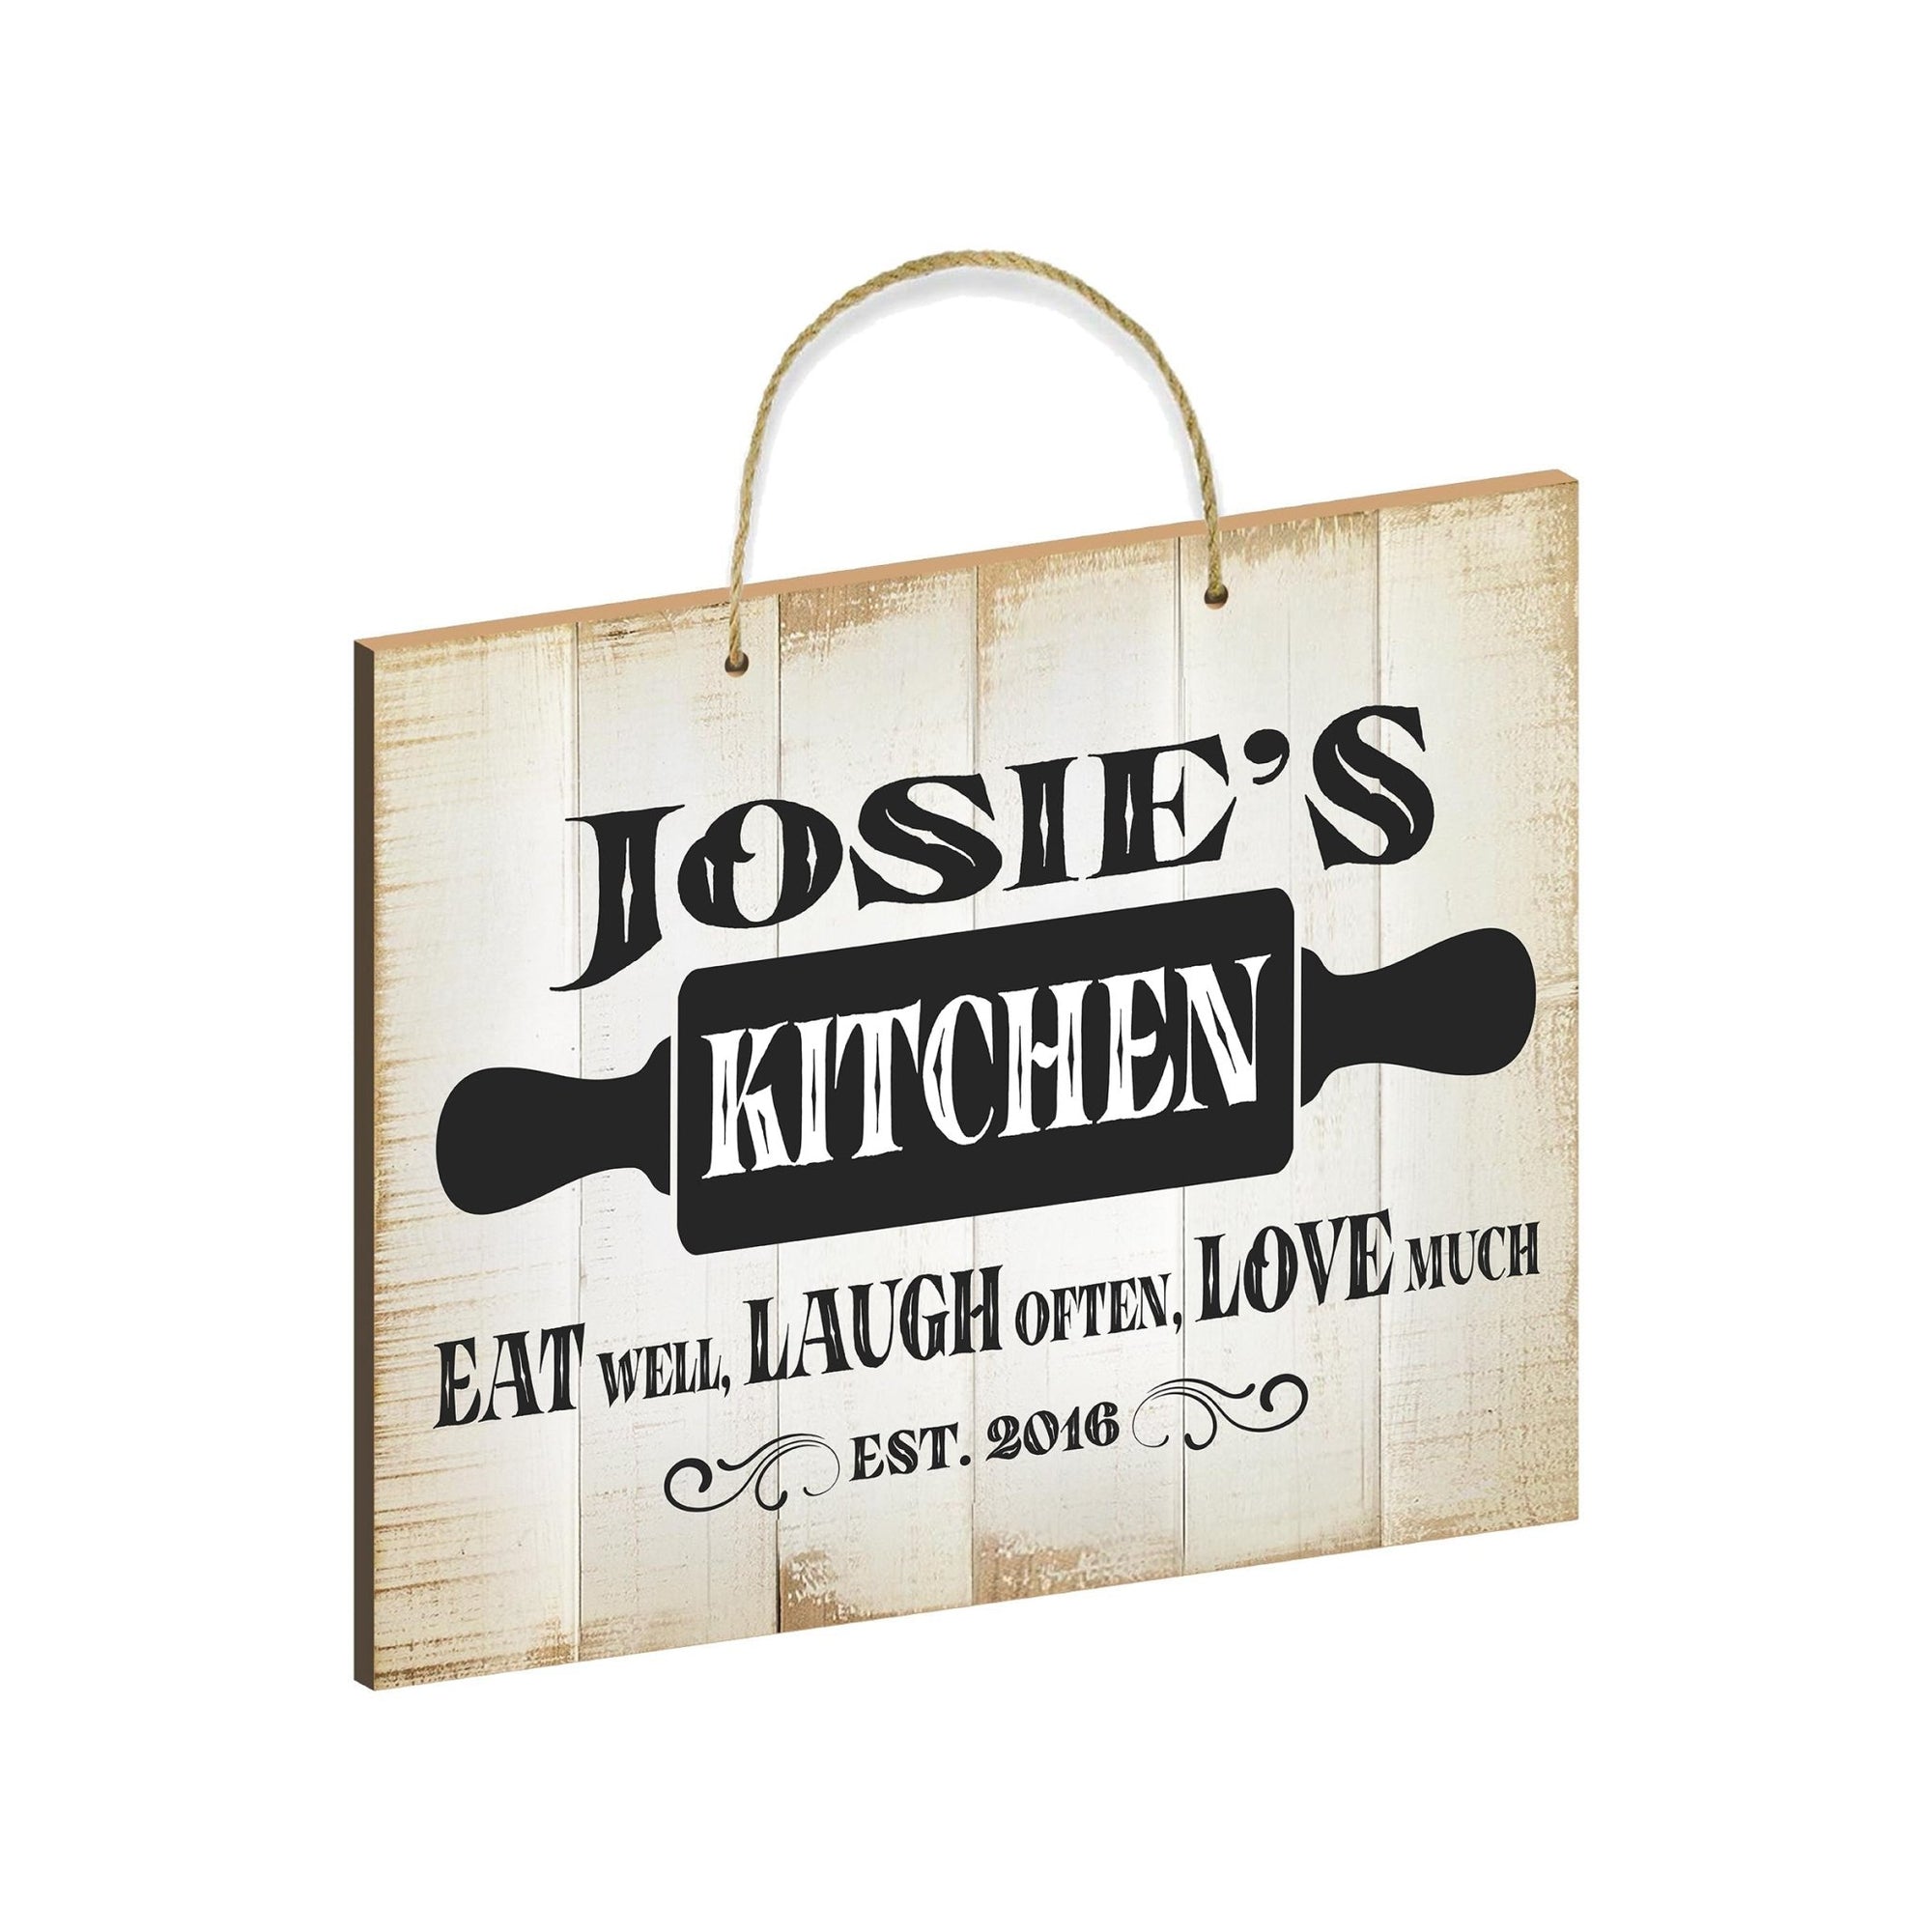 Rustic-Inspired Wooden Wall Hanging Rope Sign For Kitchen & Home Décor - Eat Well, Laugh Often, Love Much